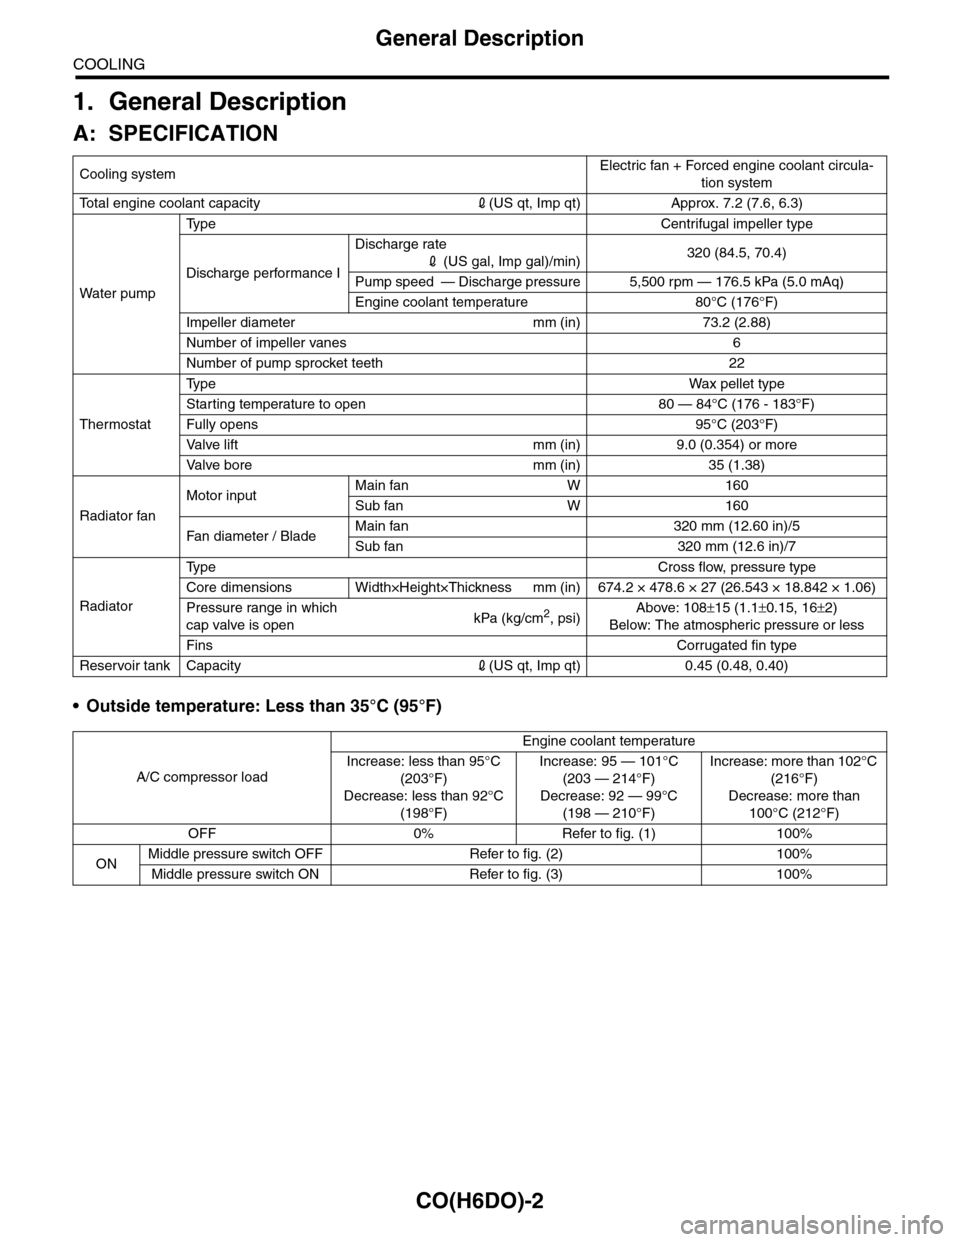 SUBARU TRIBECA 2009 1.G Service Workshop Manual CO(H6DO)-2
General Description
COOLING
1. General Description
A: SPECIFICATION
•Outside temperature: Less than 35°C (95°F)
Cooling systemElectric fan + Forced engine coolant circula-
tion system
T